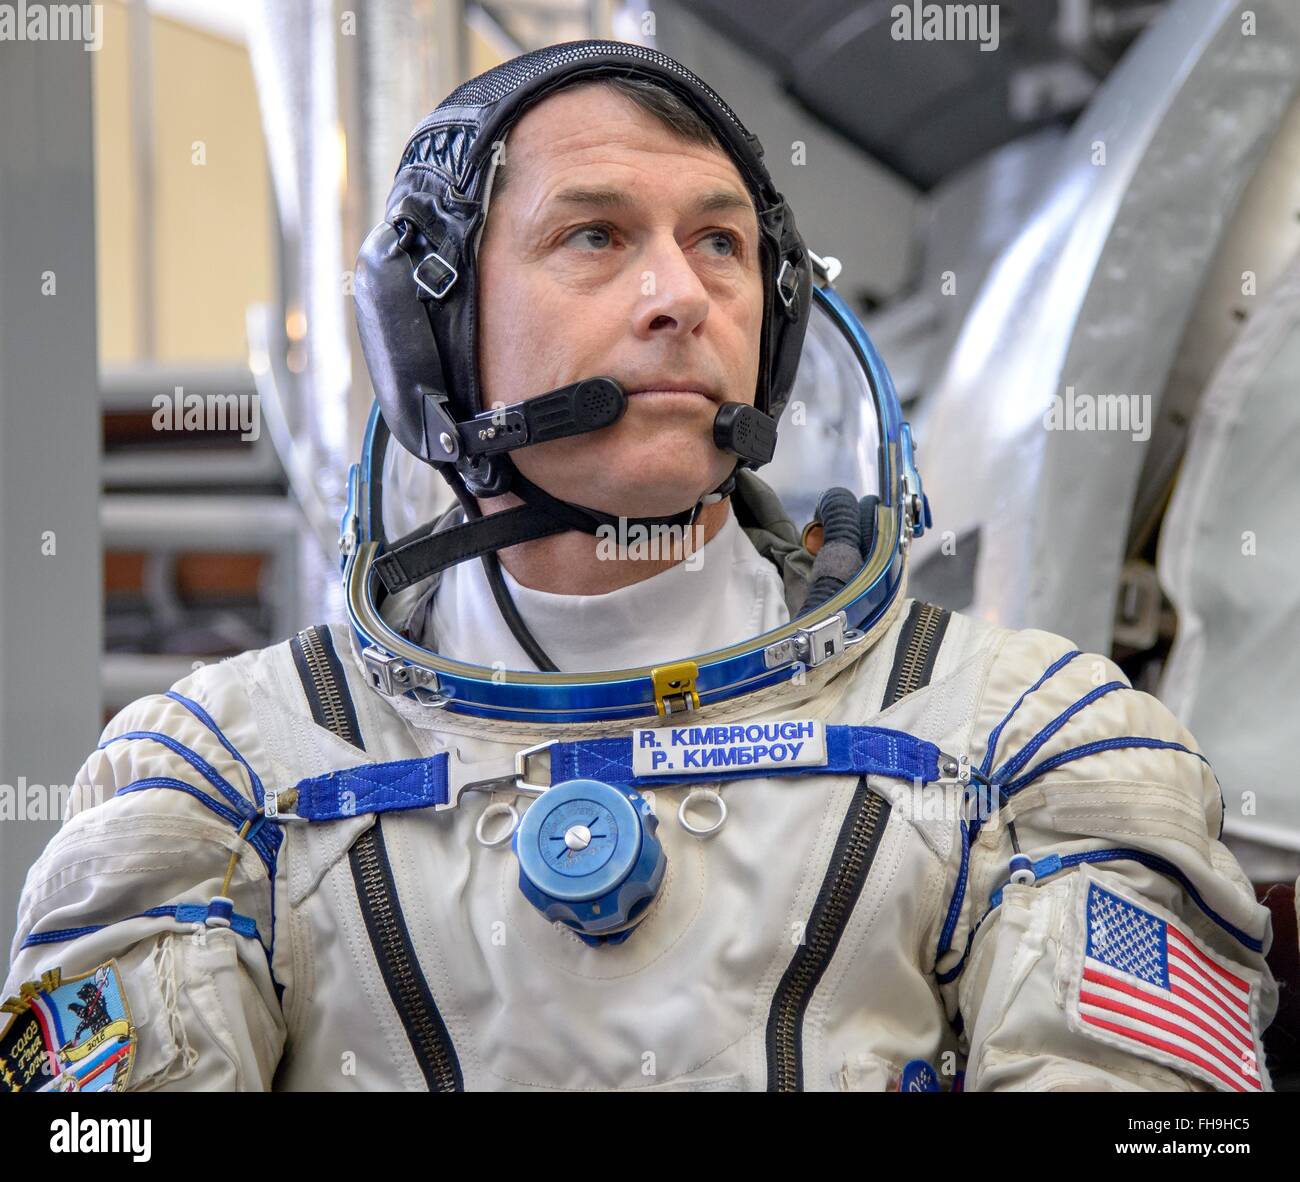 International Space Station Expedition 47 backup crew member American astronaut Shane Kimbroug answers questions from the press ahead of his Soyuz qualification exams at the Gagarin Cosmonaut Training Center February 24, 2016 in Star City, Russia. Stock Photo